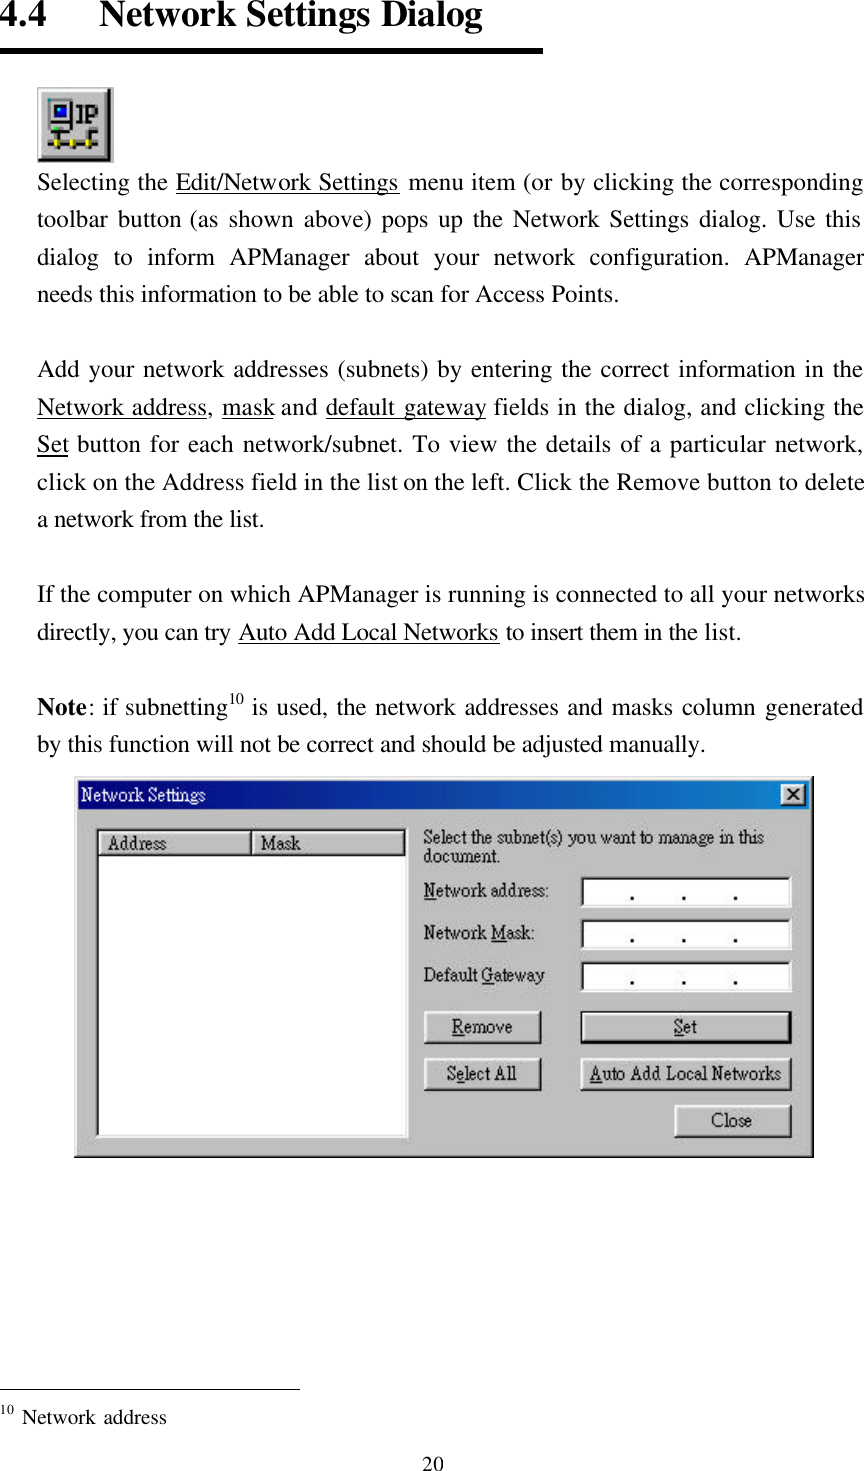  204.4   Network Settings Dialog  Selecting the Edit/Network Settings menu item (or by clicking the corresponding toolbar button (as shown above) pops up the Network Settings dialog. Use this dialog to inform APManager about your network configuration. APManager needs this information to be able to scan for Access Points.  Add your network addresses (subnets) by entering the correct information in the Network address, mask and default gateway fields in the dialog, and clicking the Set button for each network/subnet. To view the details of a particular network, click on the Address field in the list on the left. Click the Remove button to delete a network from the list.  If the computer on which APManager is running is connected to all your networks directly, you can try Auto Add Local Networks to insert them in the list.    Note: if subnetting10 is used, the network addresses and masks column generated by this function will not be correct and should be adjusted manually.                                                   10 Network address 